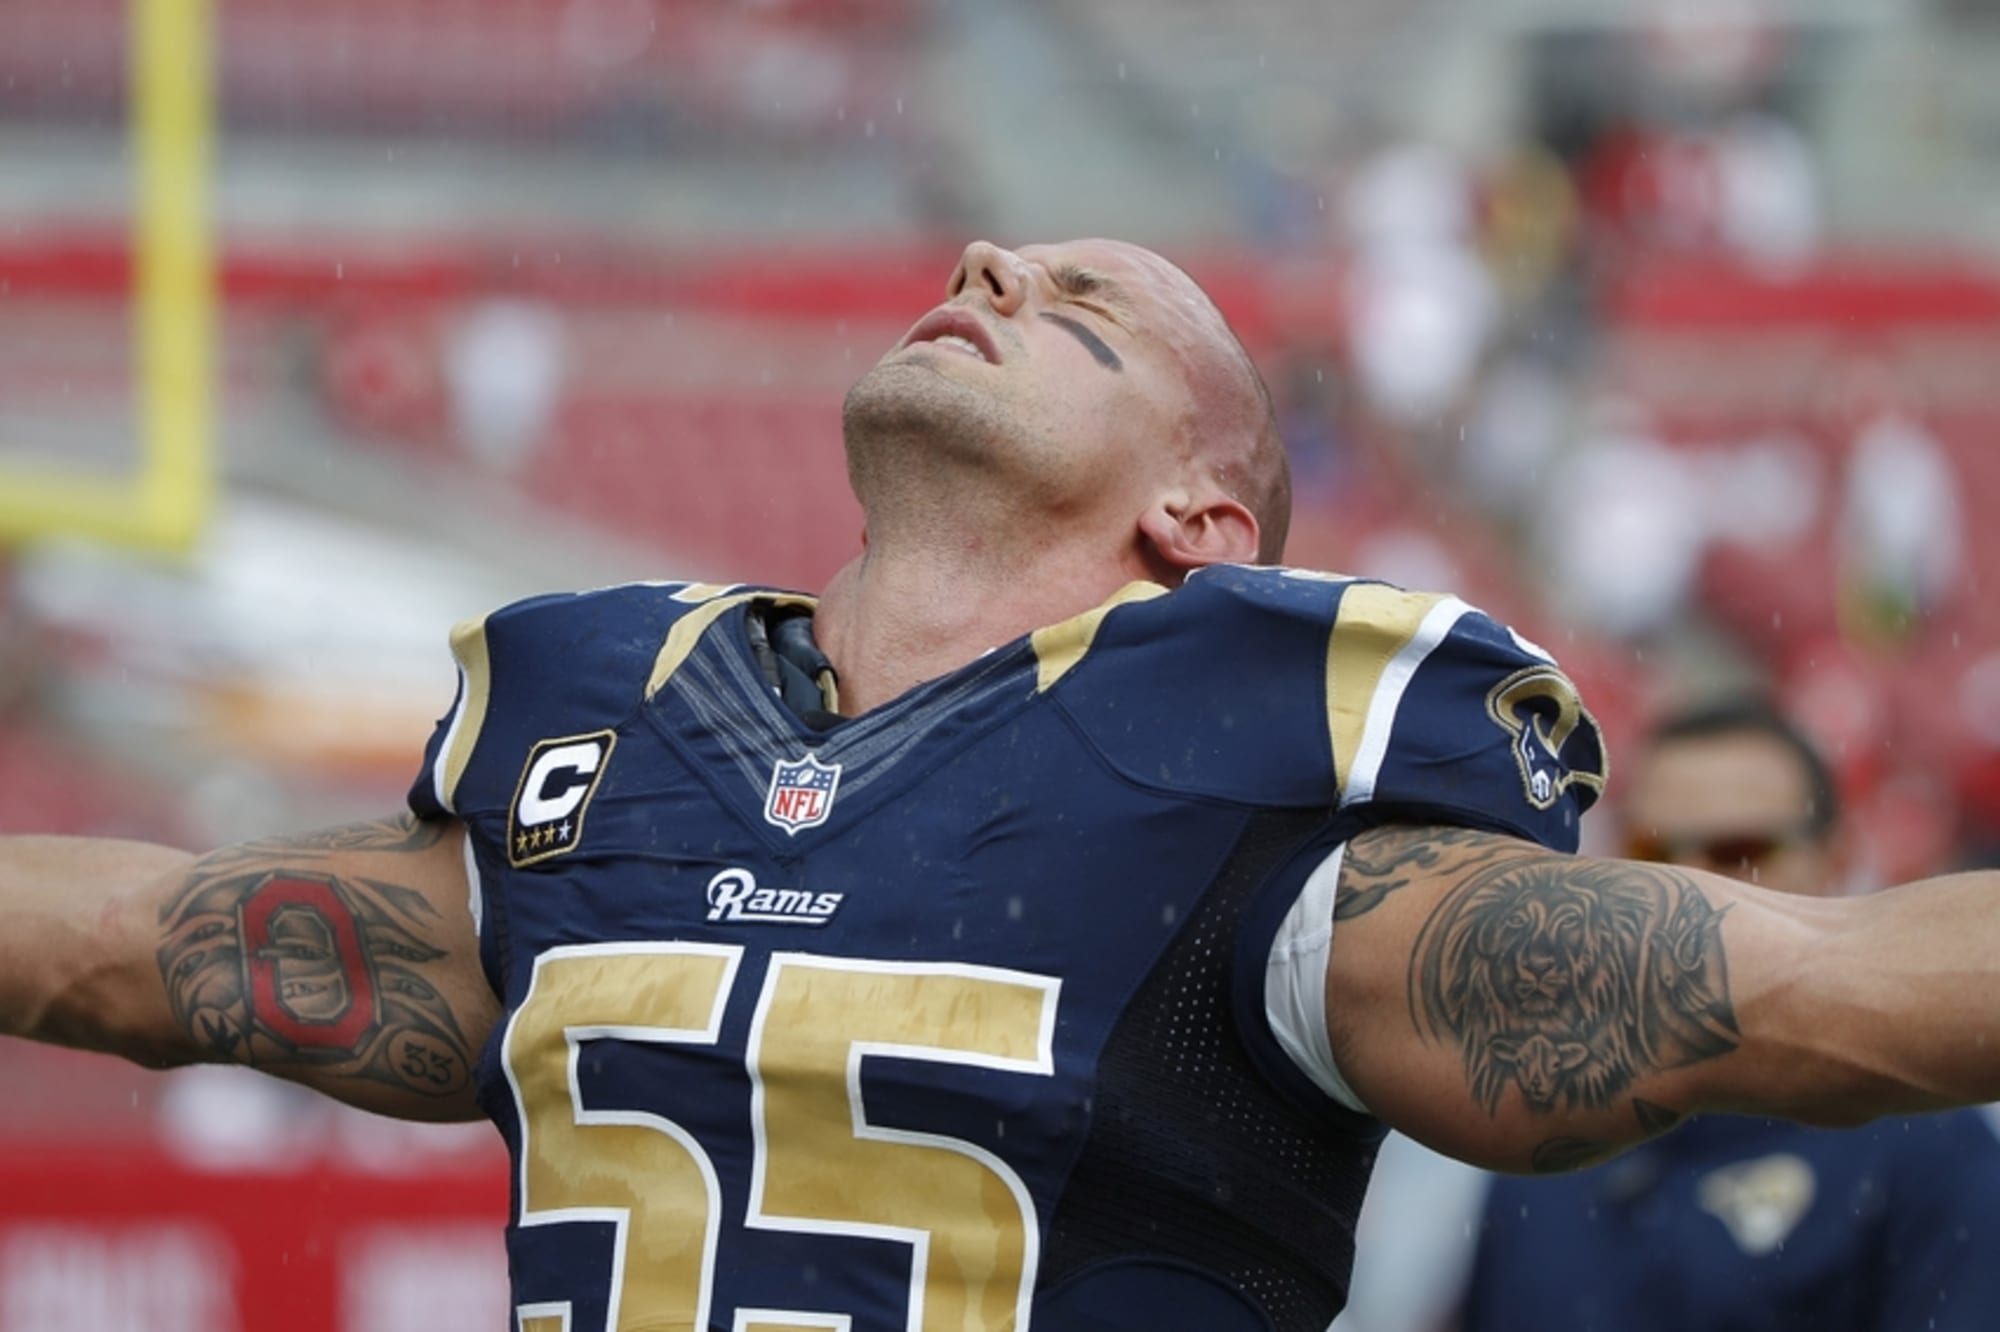 Saints agree to terms with free agent LB James Laurinaitis